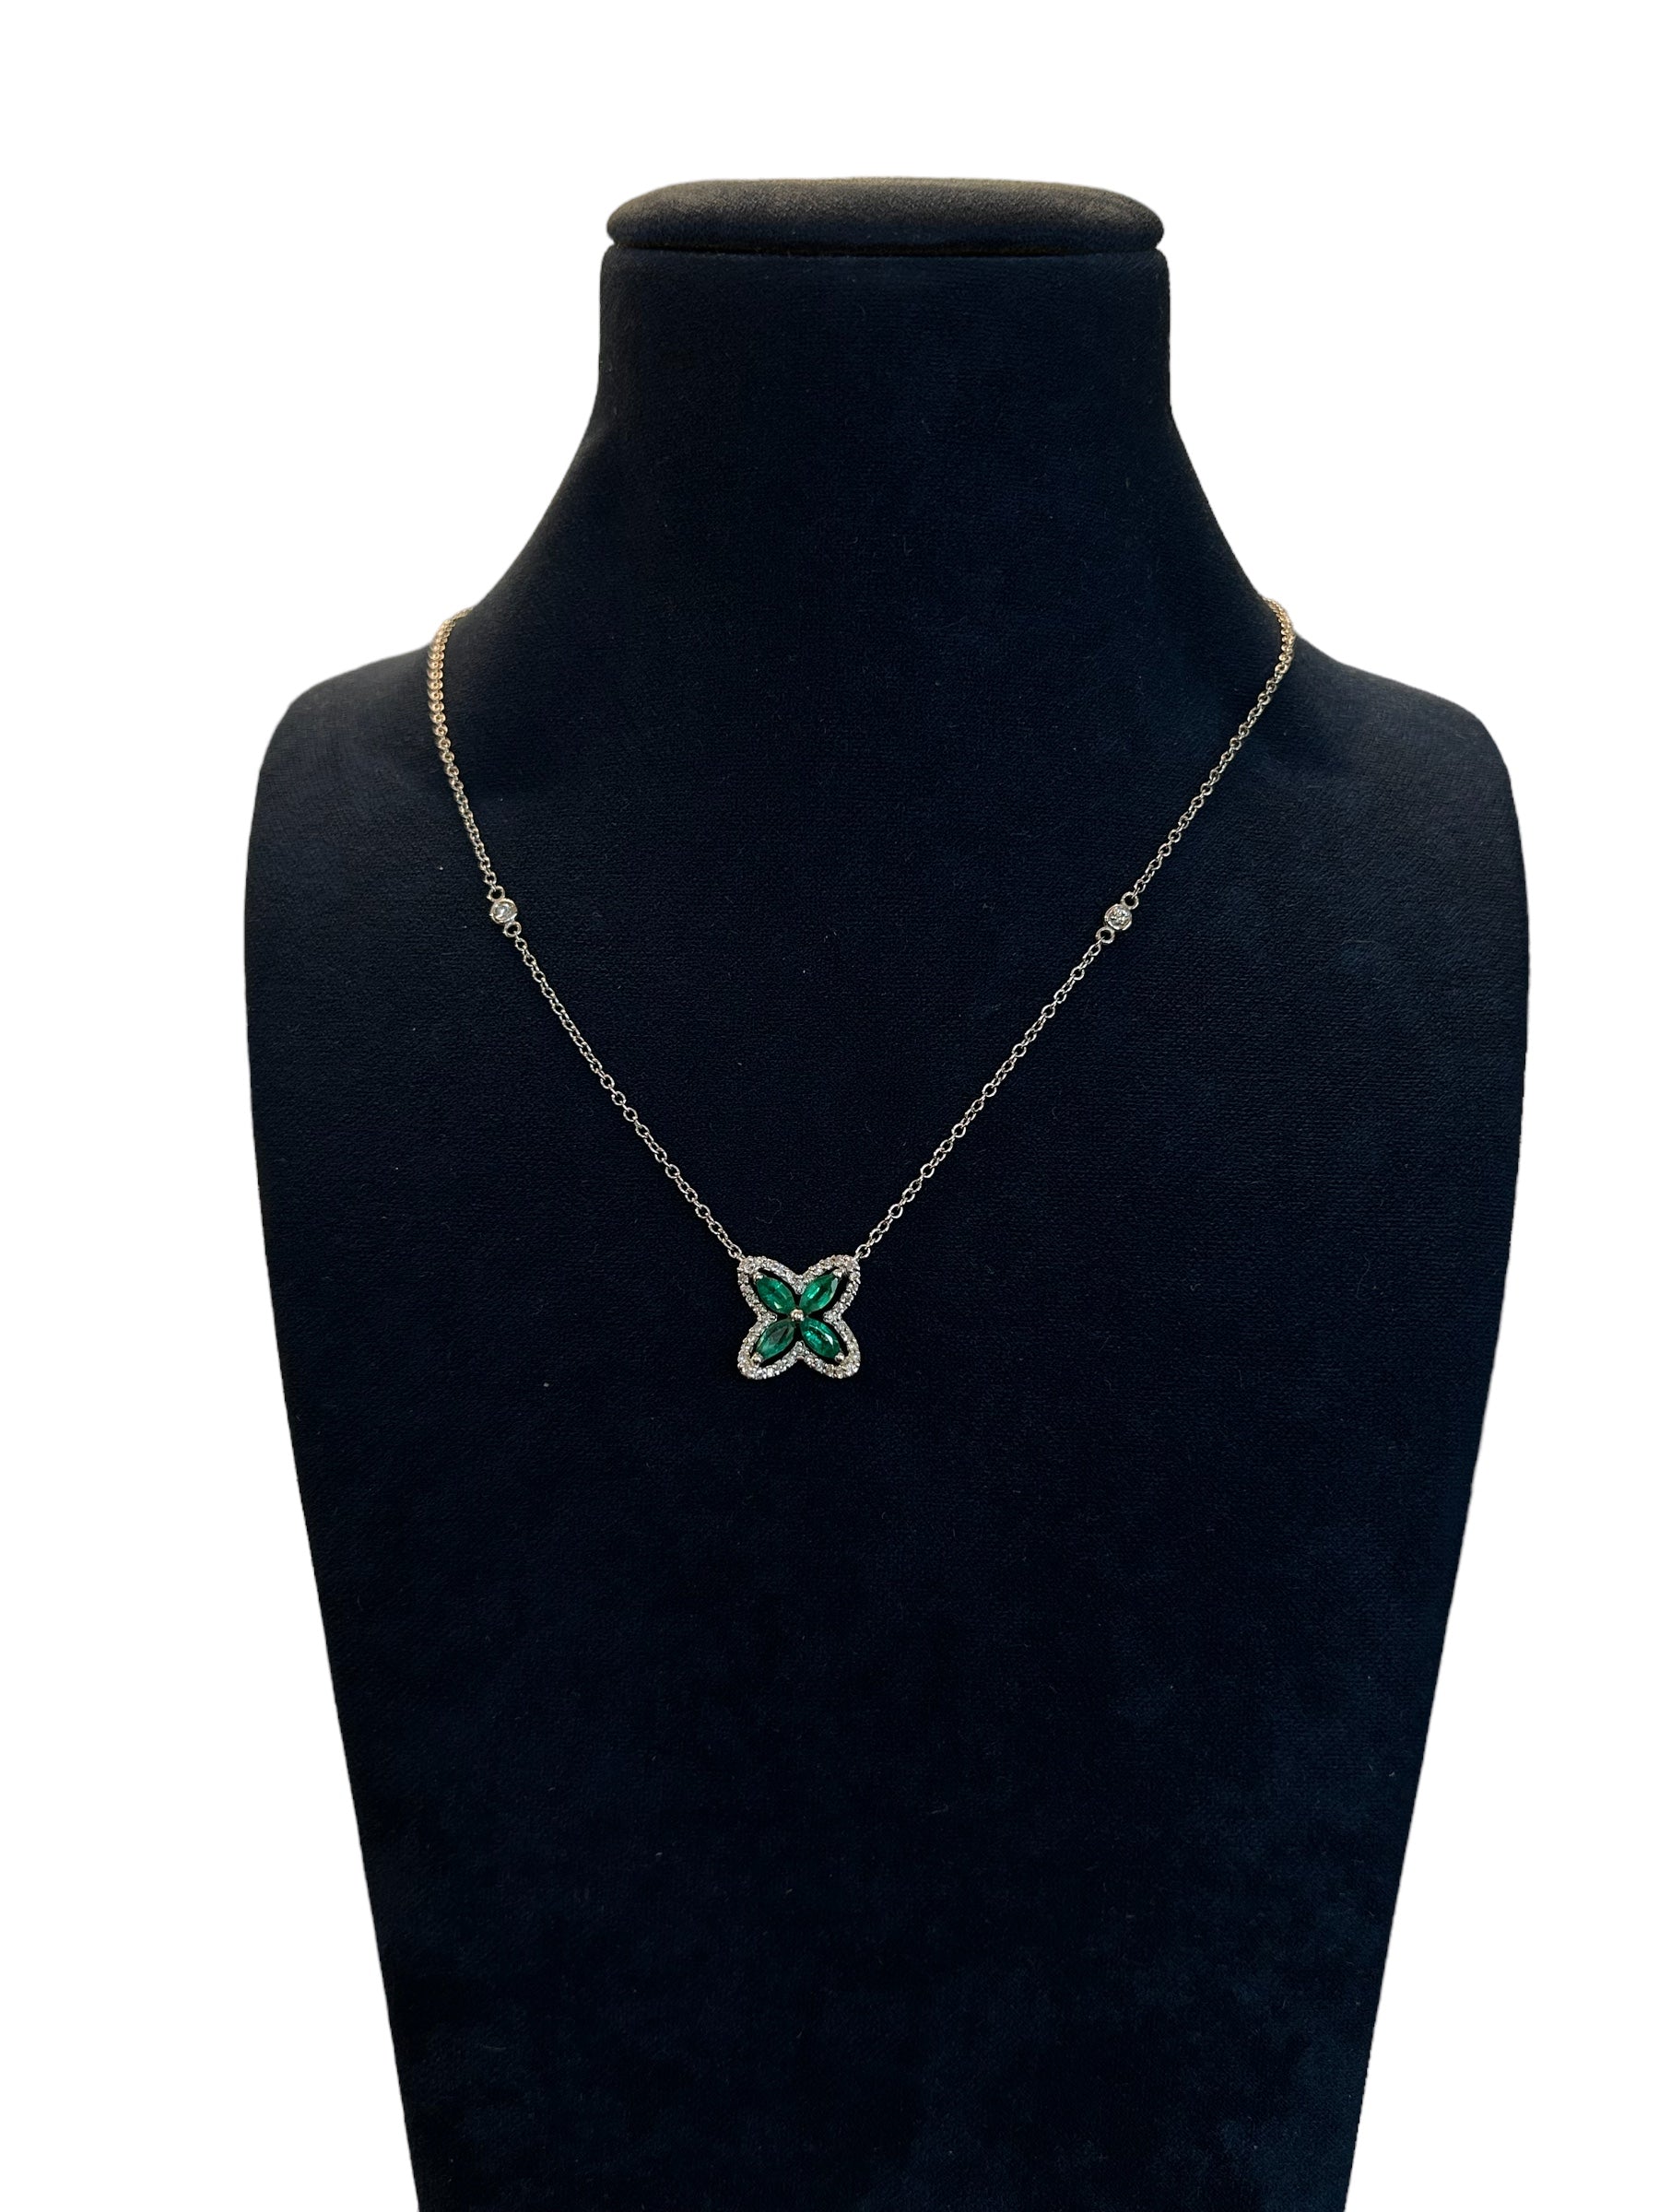 FIORE necklace in white gold and diamond ring with emerald, 0.47 carats of emeralds - 1395C03MW